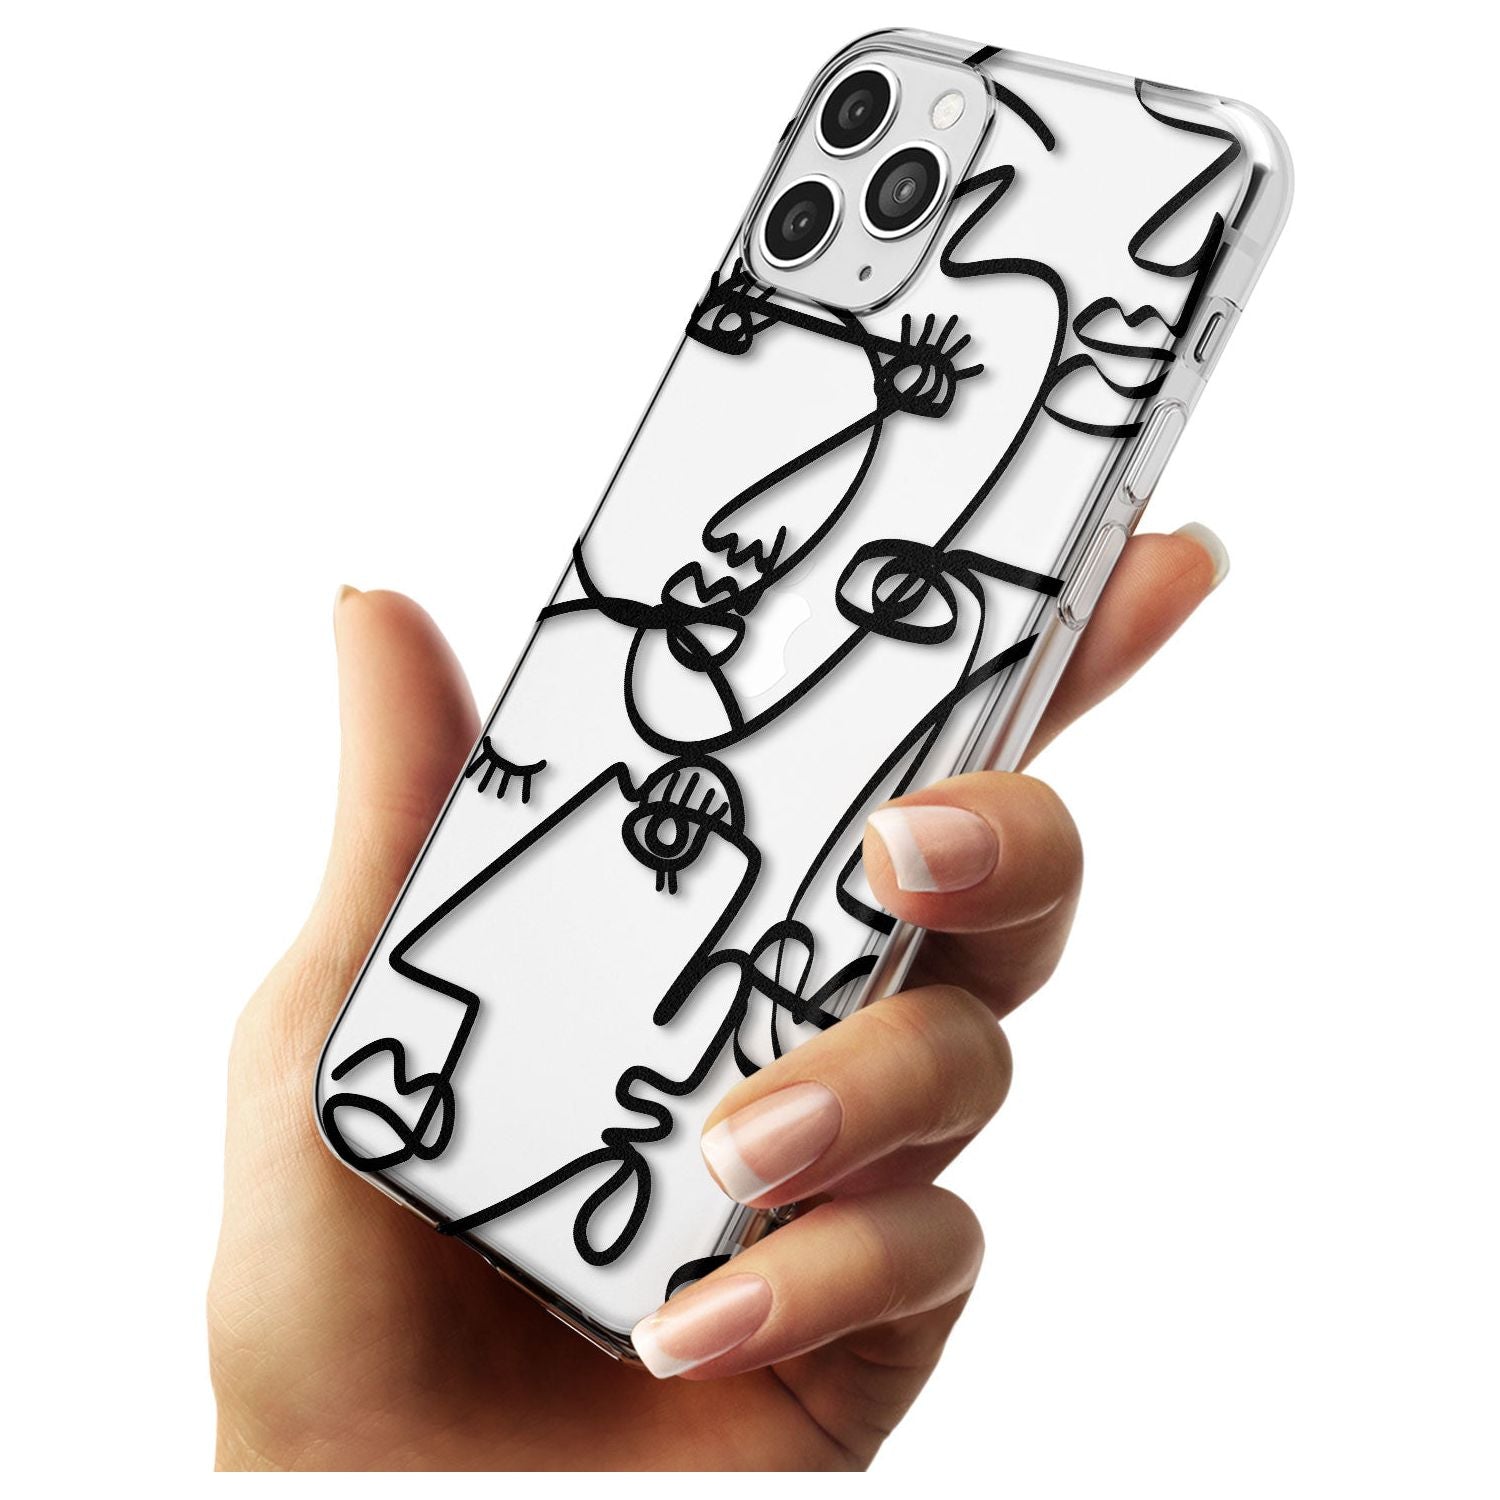 Continuous Line Faces: Black on Clear Black Impact Phone Case for iPhone 11 Pro Max